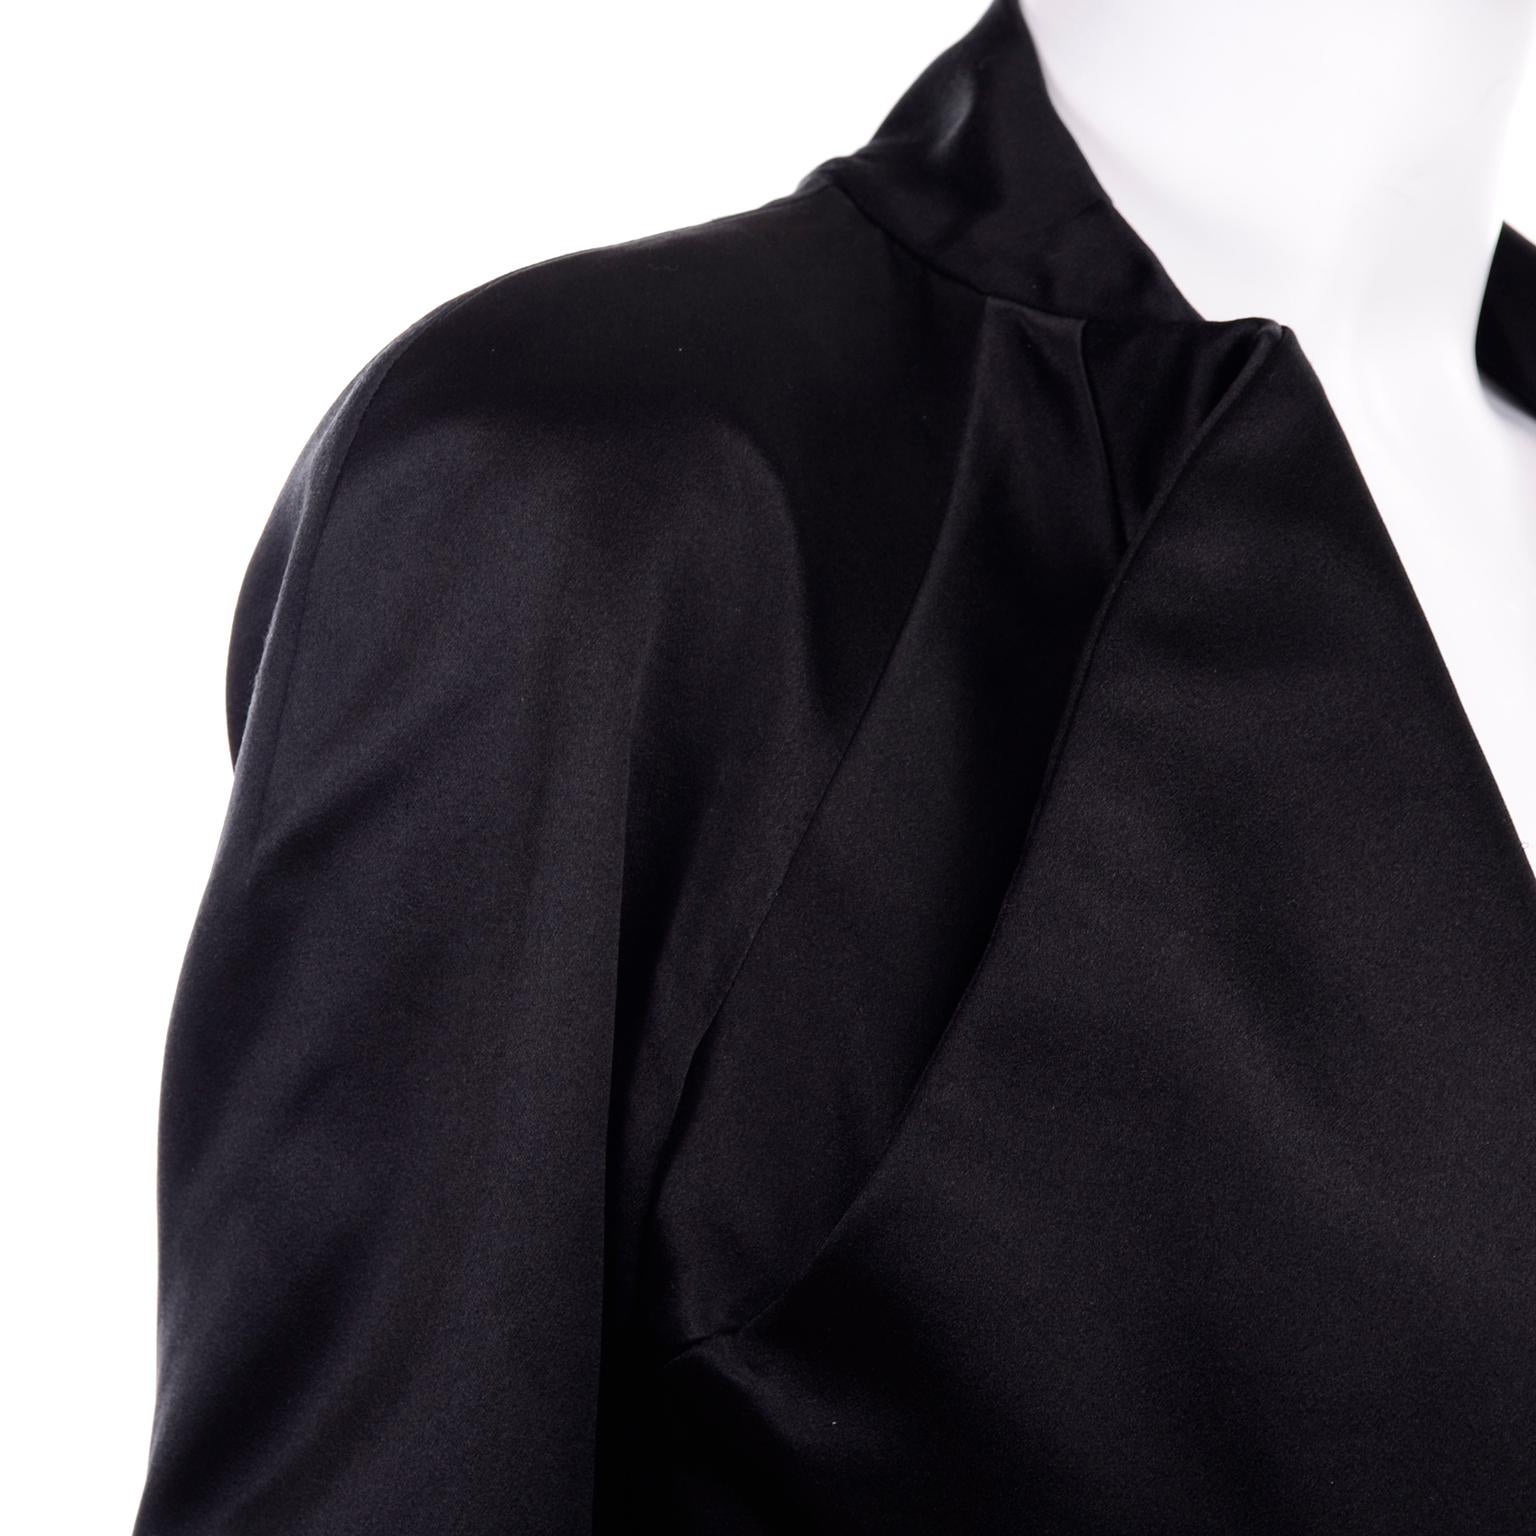 2009 Alexander McQueen Black Silk Cutaway Cropped Tuxedo Jacket With Tails 5